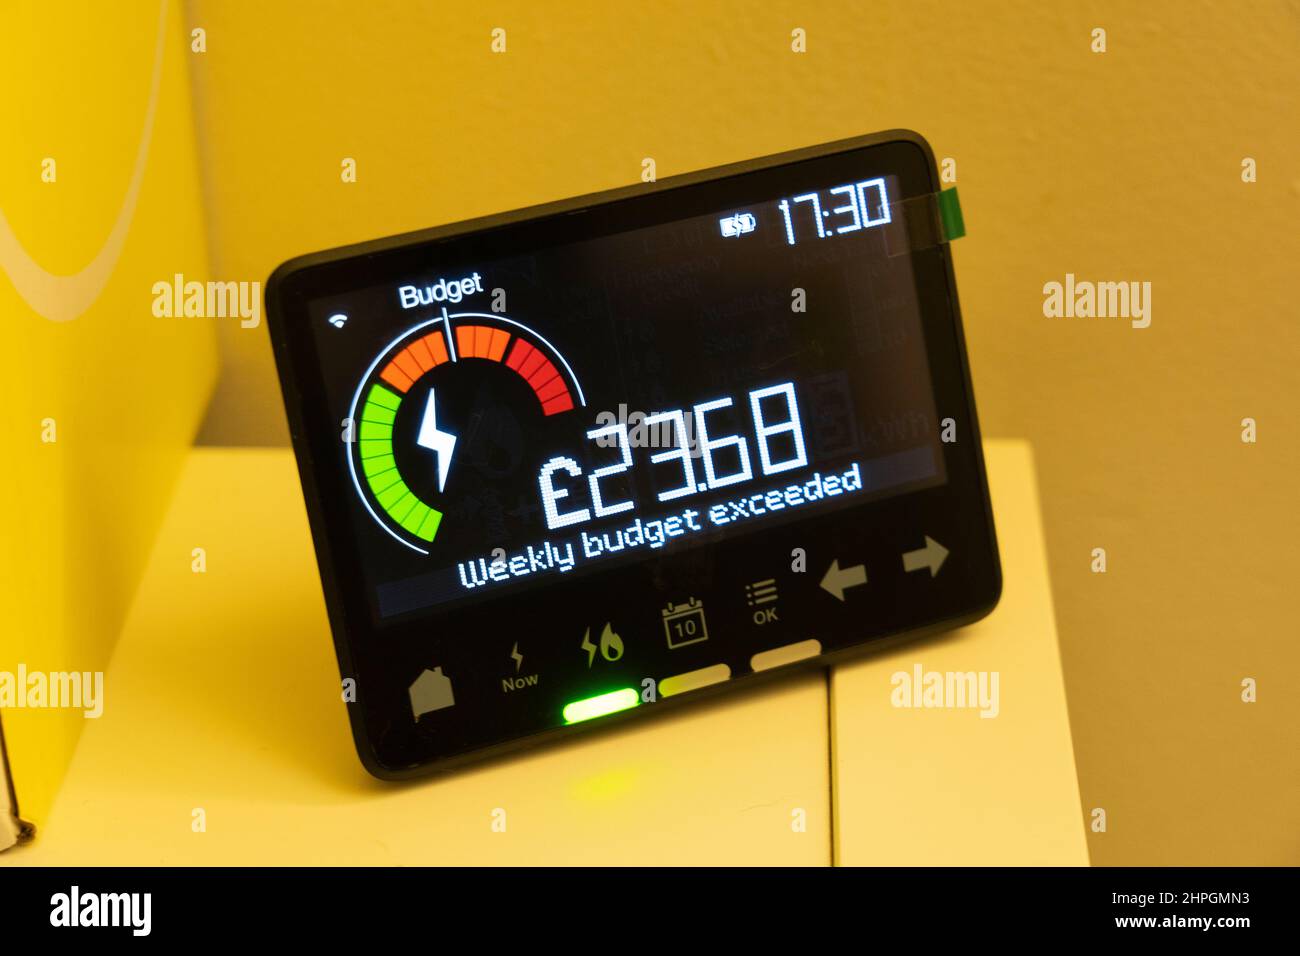 A smart energy meter measuring electricity usage and stating the weekly spend in British Pounds. England Stock Photo